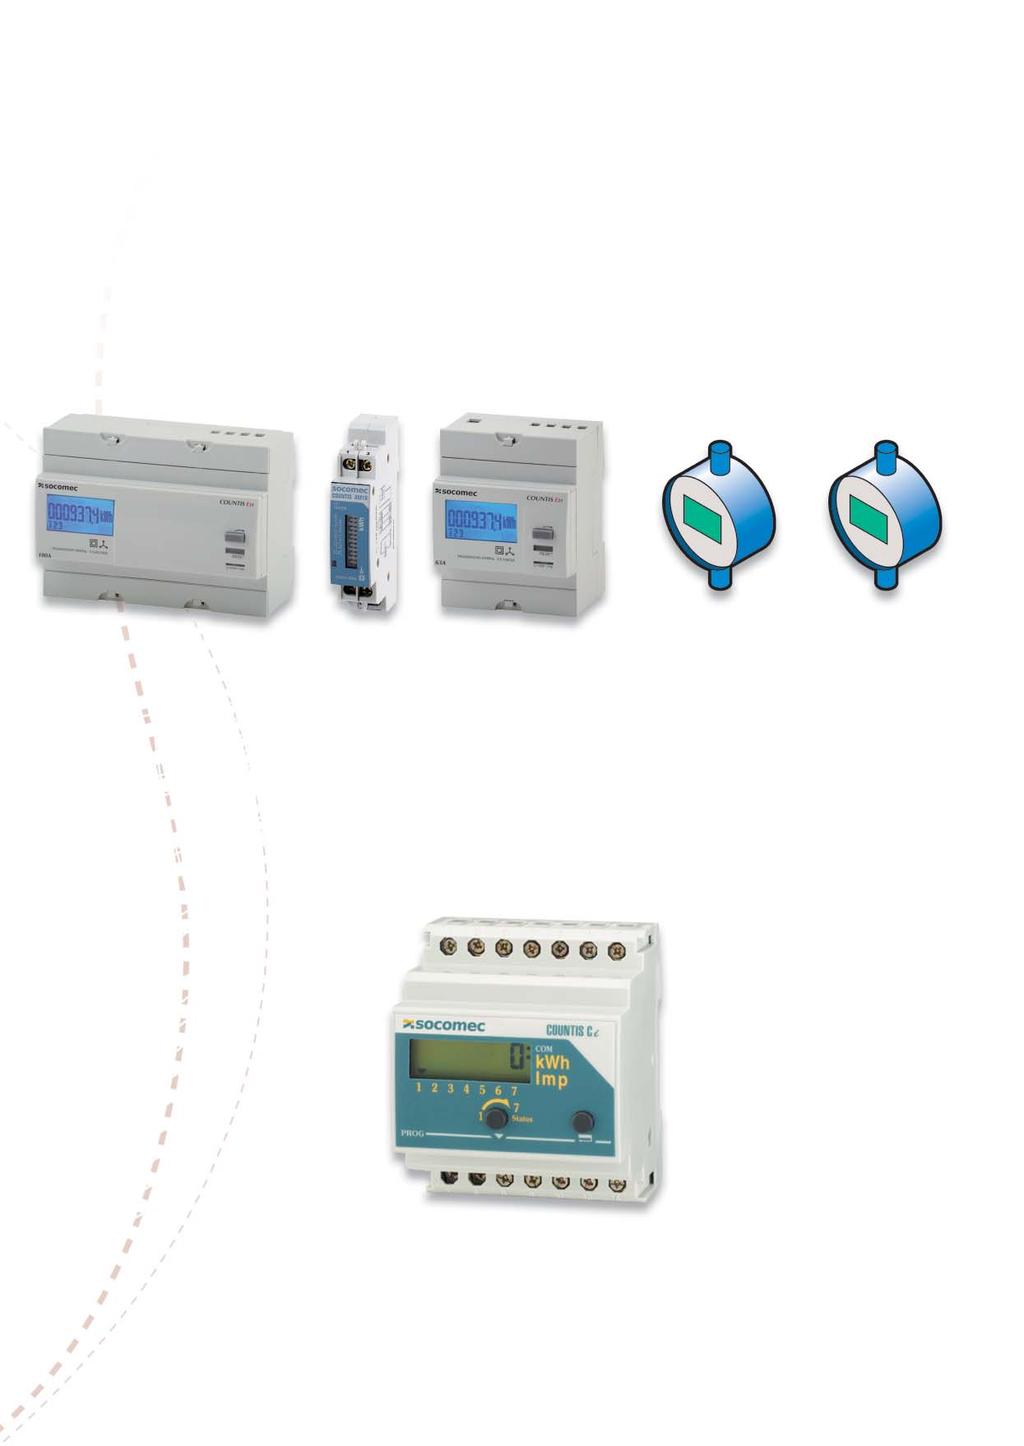 Countis Pulse Collector PULSE COLLECTOR MODULE WITH COMMUNICATIONS - 7 inputs: kwh or pulses (water, gas, air,...). - Monthly kwh consumption (12 months). - Load curve.